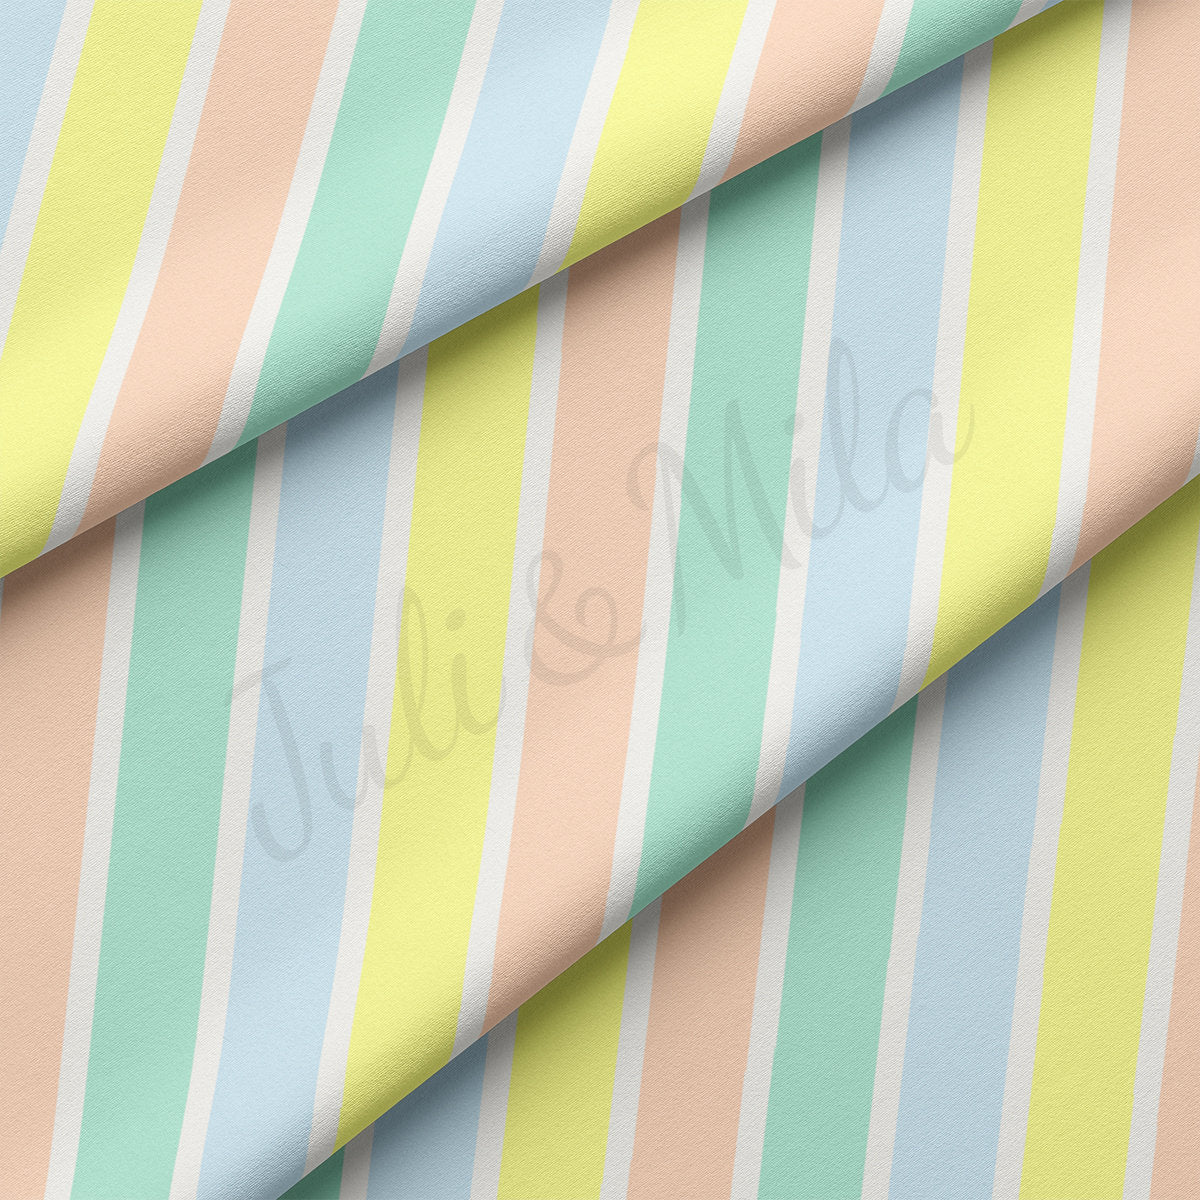 DBP Fabric Double Brushed Polyester DBP2542 Easter